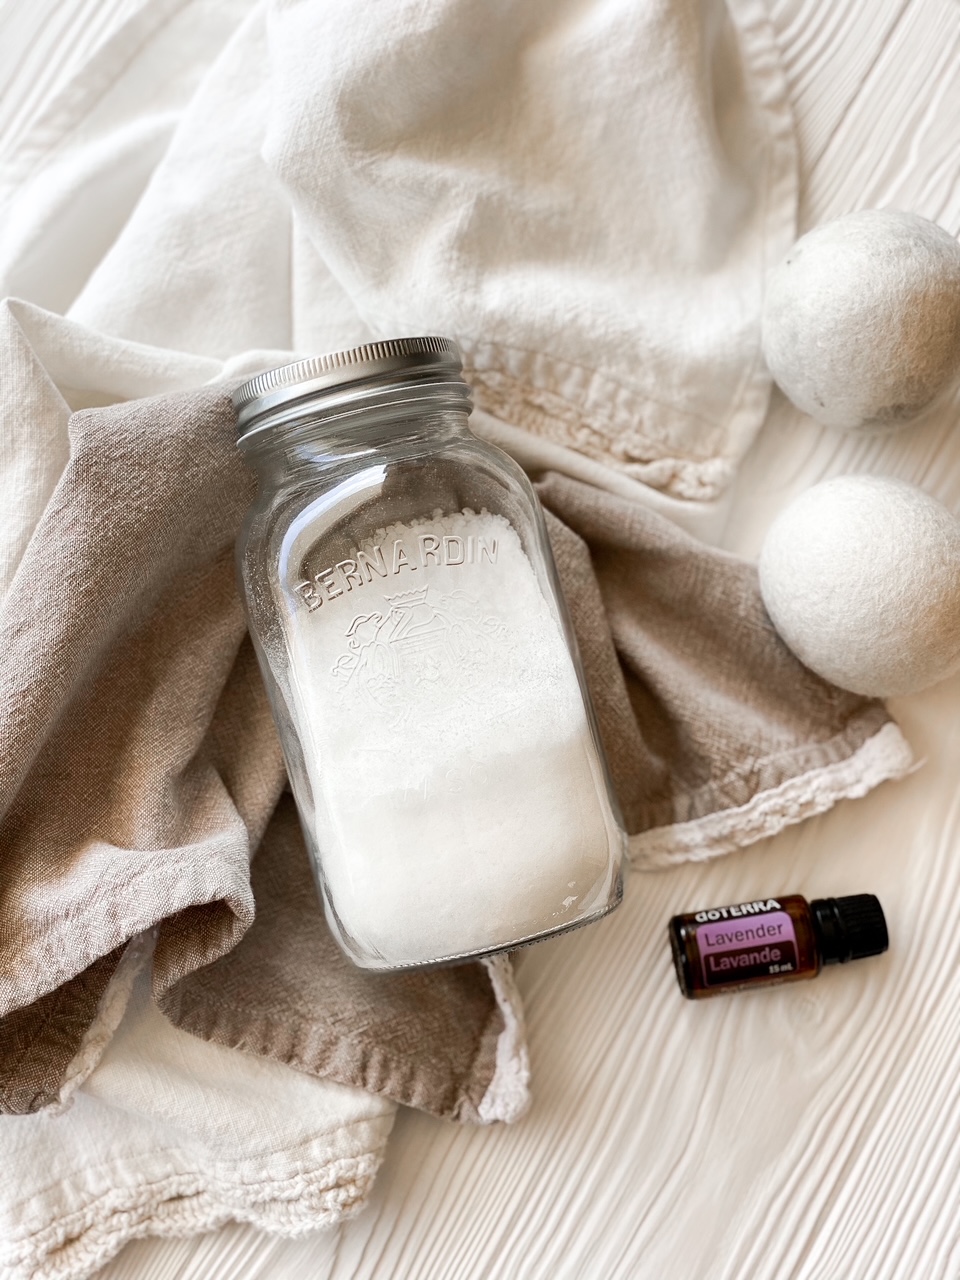 How To Make DIY Fabric Softener & Scent Booster